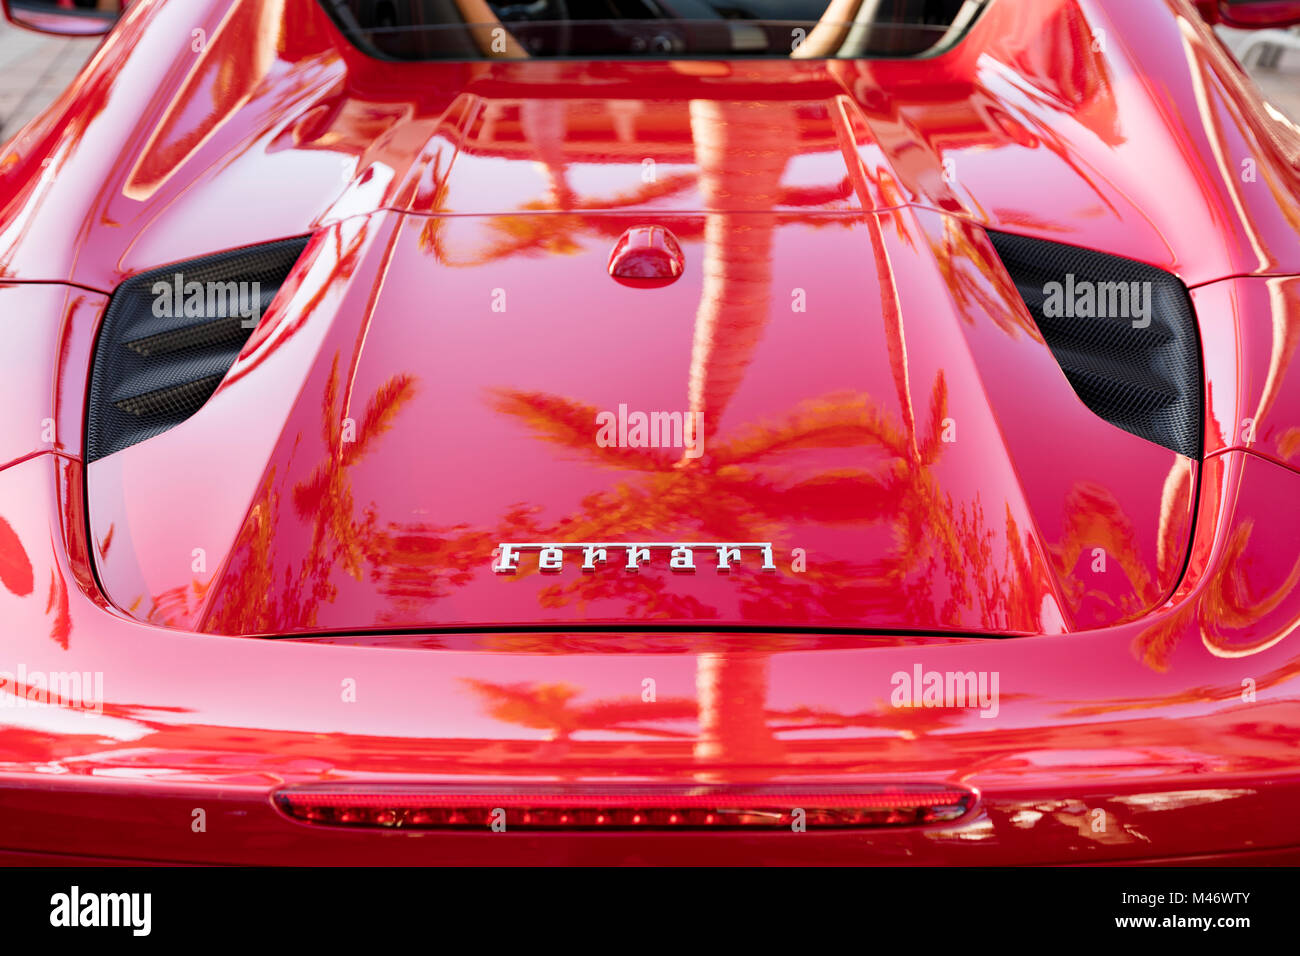 Red Ferrari 458 with palm tree reflection at 'Cars on 5th' autoshow, Naples, Florida, USA Stock Photo